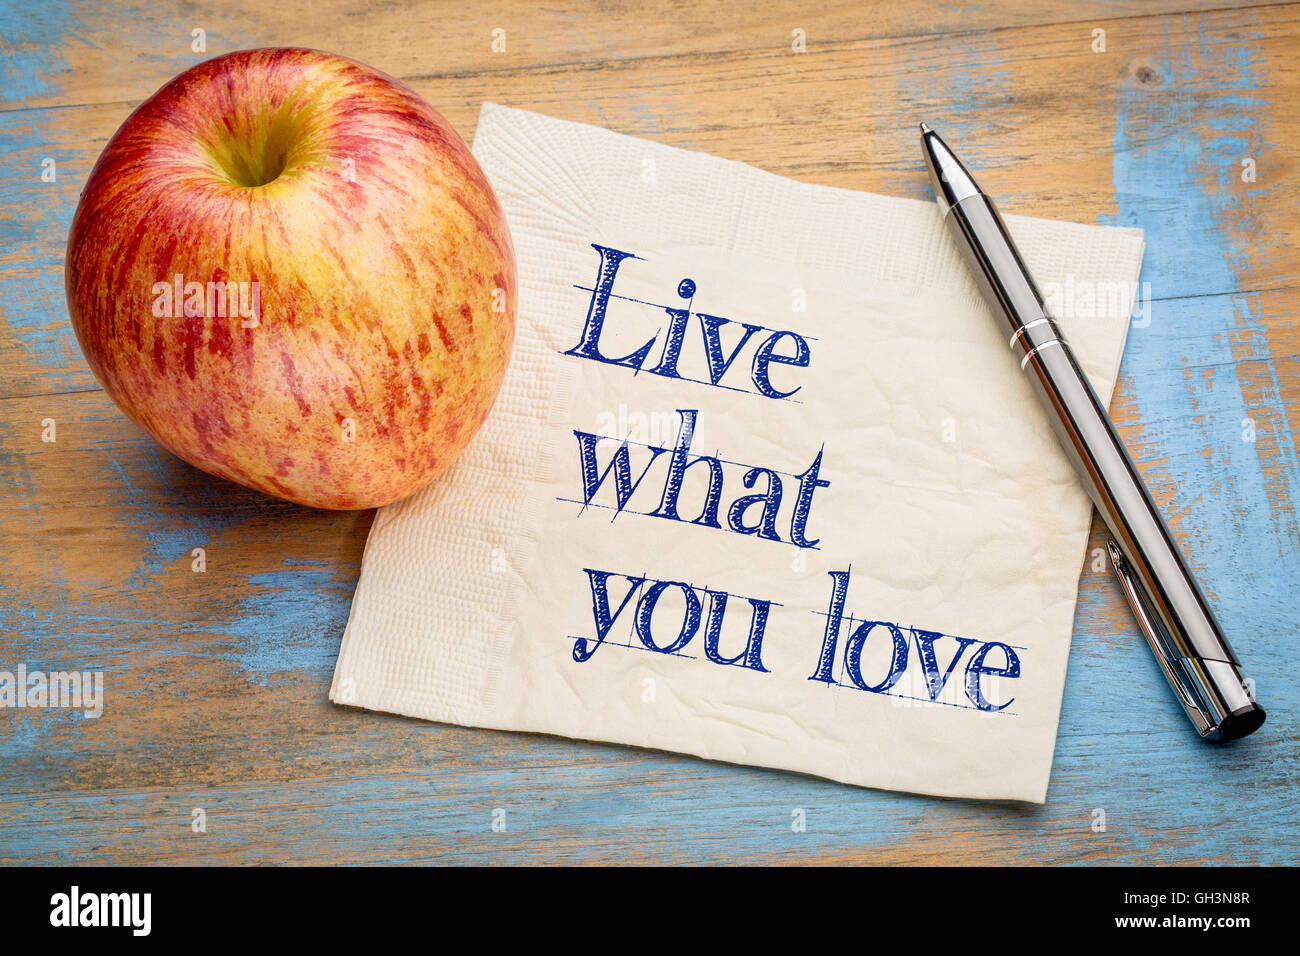 Live what you love - handwriting on a napkin with a fresh apple Stock Photo